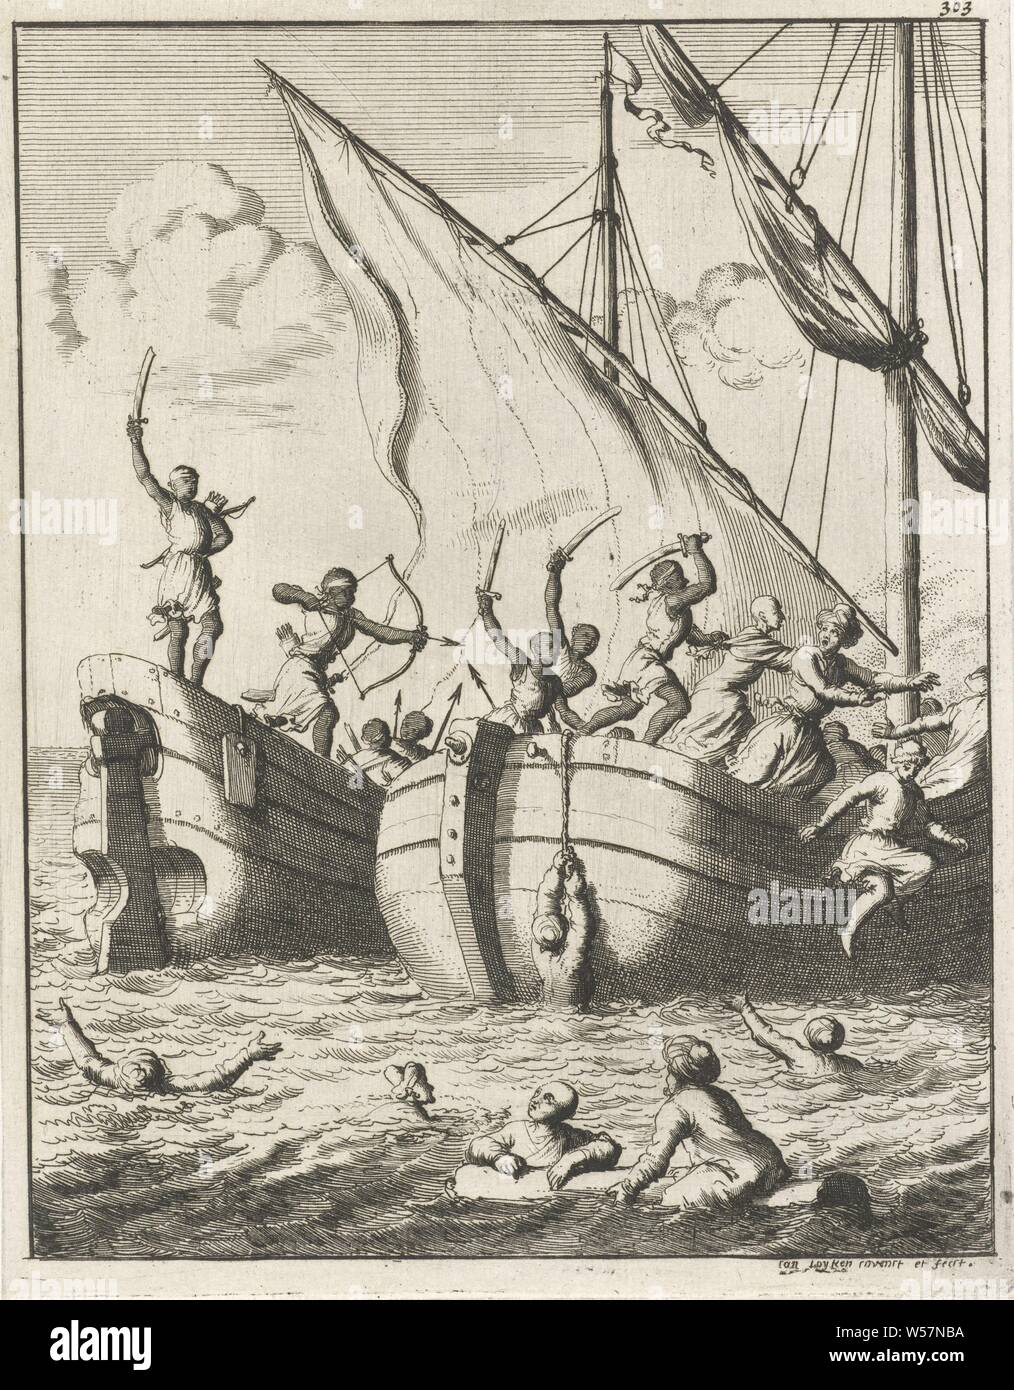 Ship conquered by pirates in Congo, Number numbered top right: 303, sailing ship, sailing boat, pirate, corsair, buccaneer, Congo, Jan Luyken (mentioned on object), Amsterdam, 1682, paper, etching, h 173 mm × w 134 mm Stock Photo